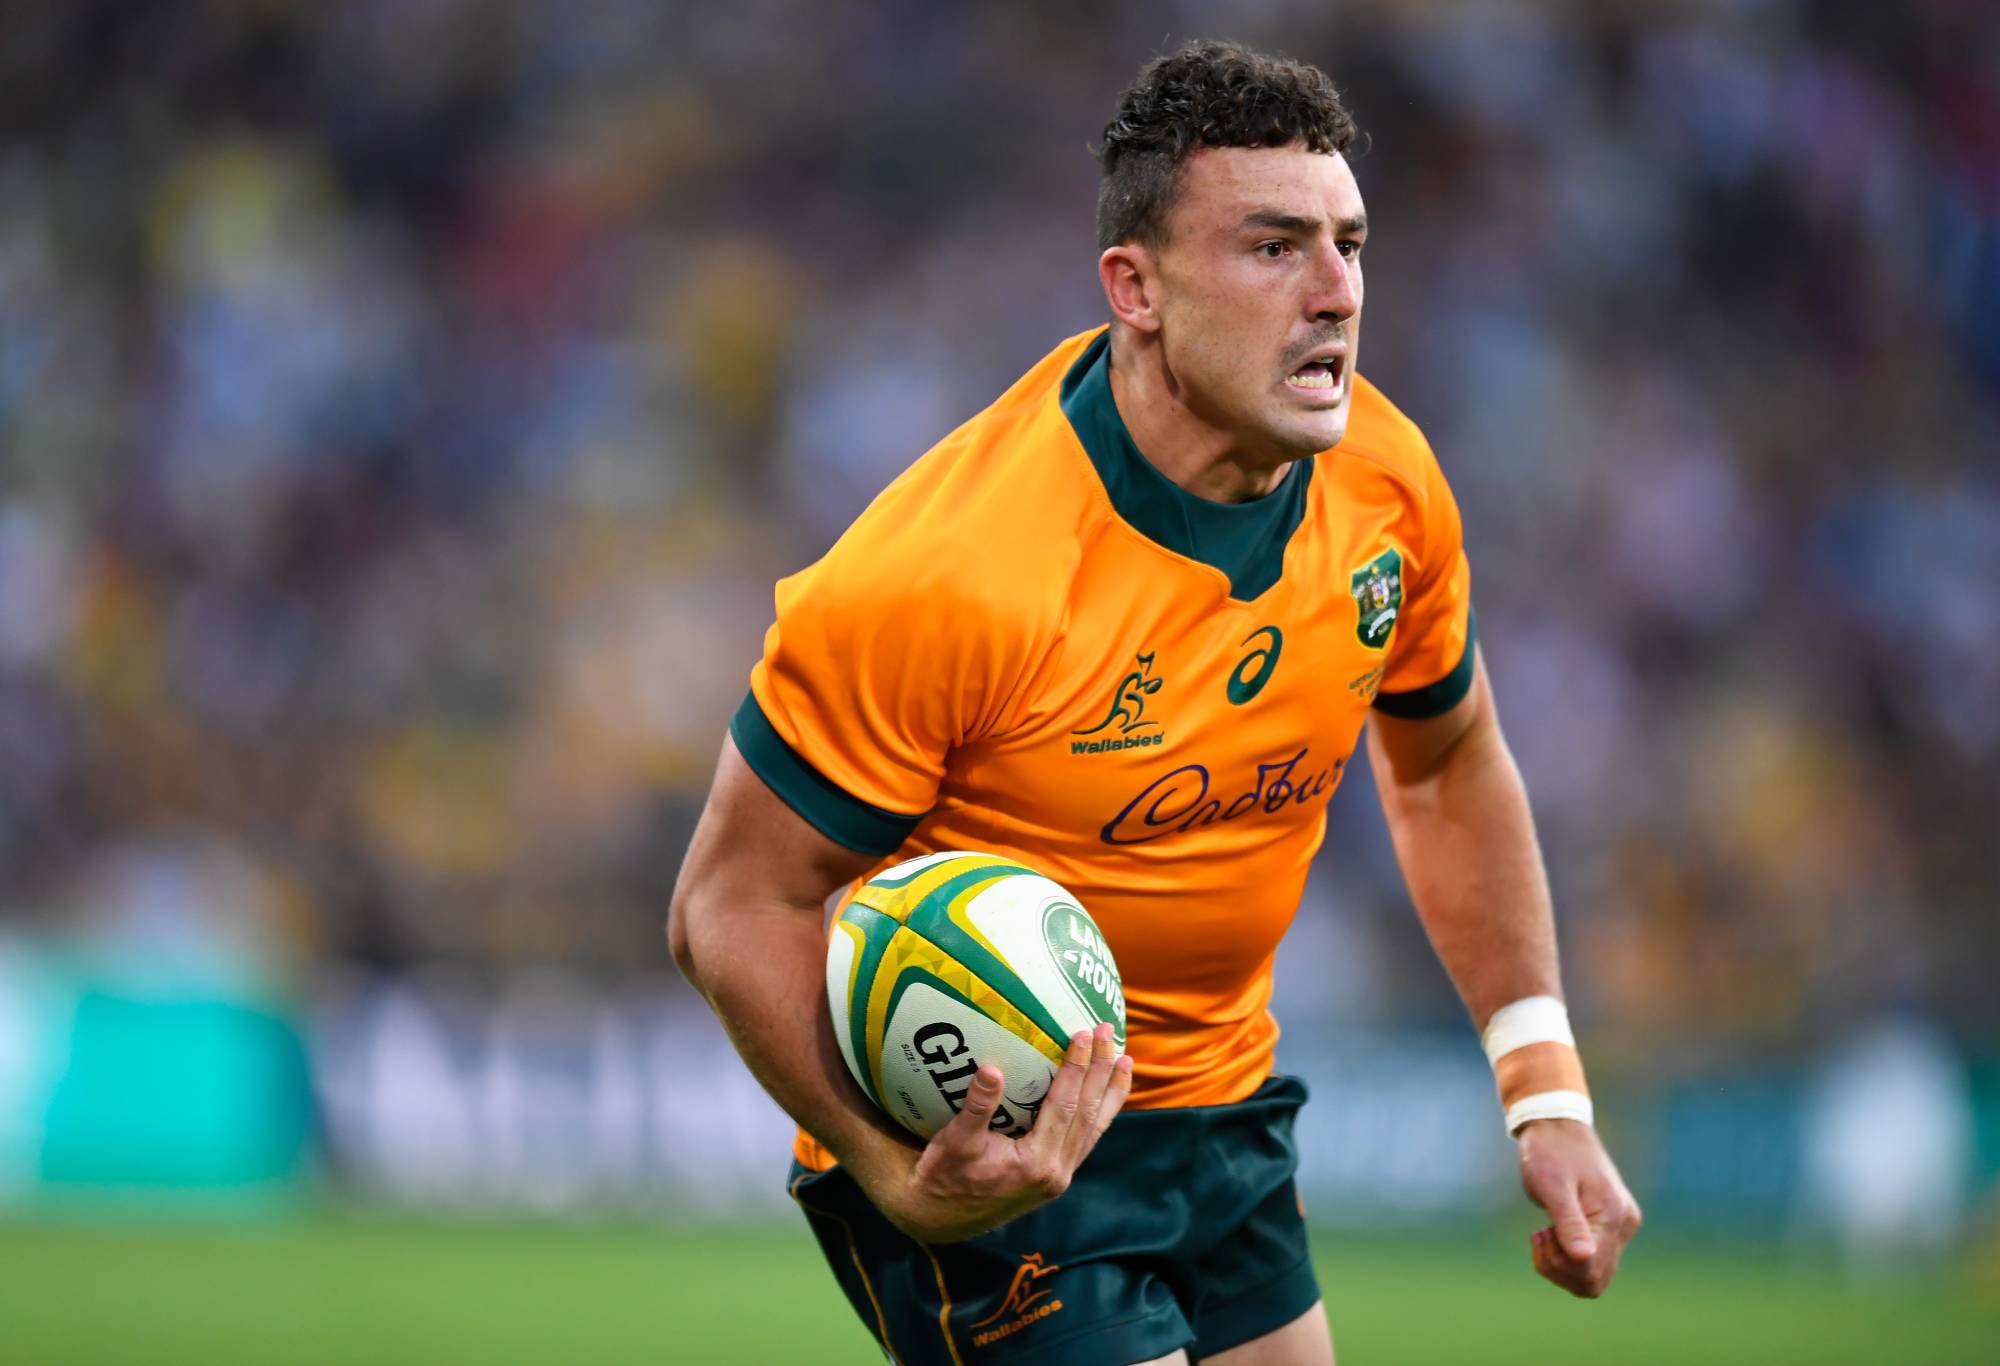 Tom Banks of the Wallabies runs the ball during The Rugby Championship match between the Australian Wallabies and the South Africa Springboks at Suncorp Stadium on September 18, 2021 in Brisbane, Australia. (Photo by Albert Perez/Getty Images)